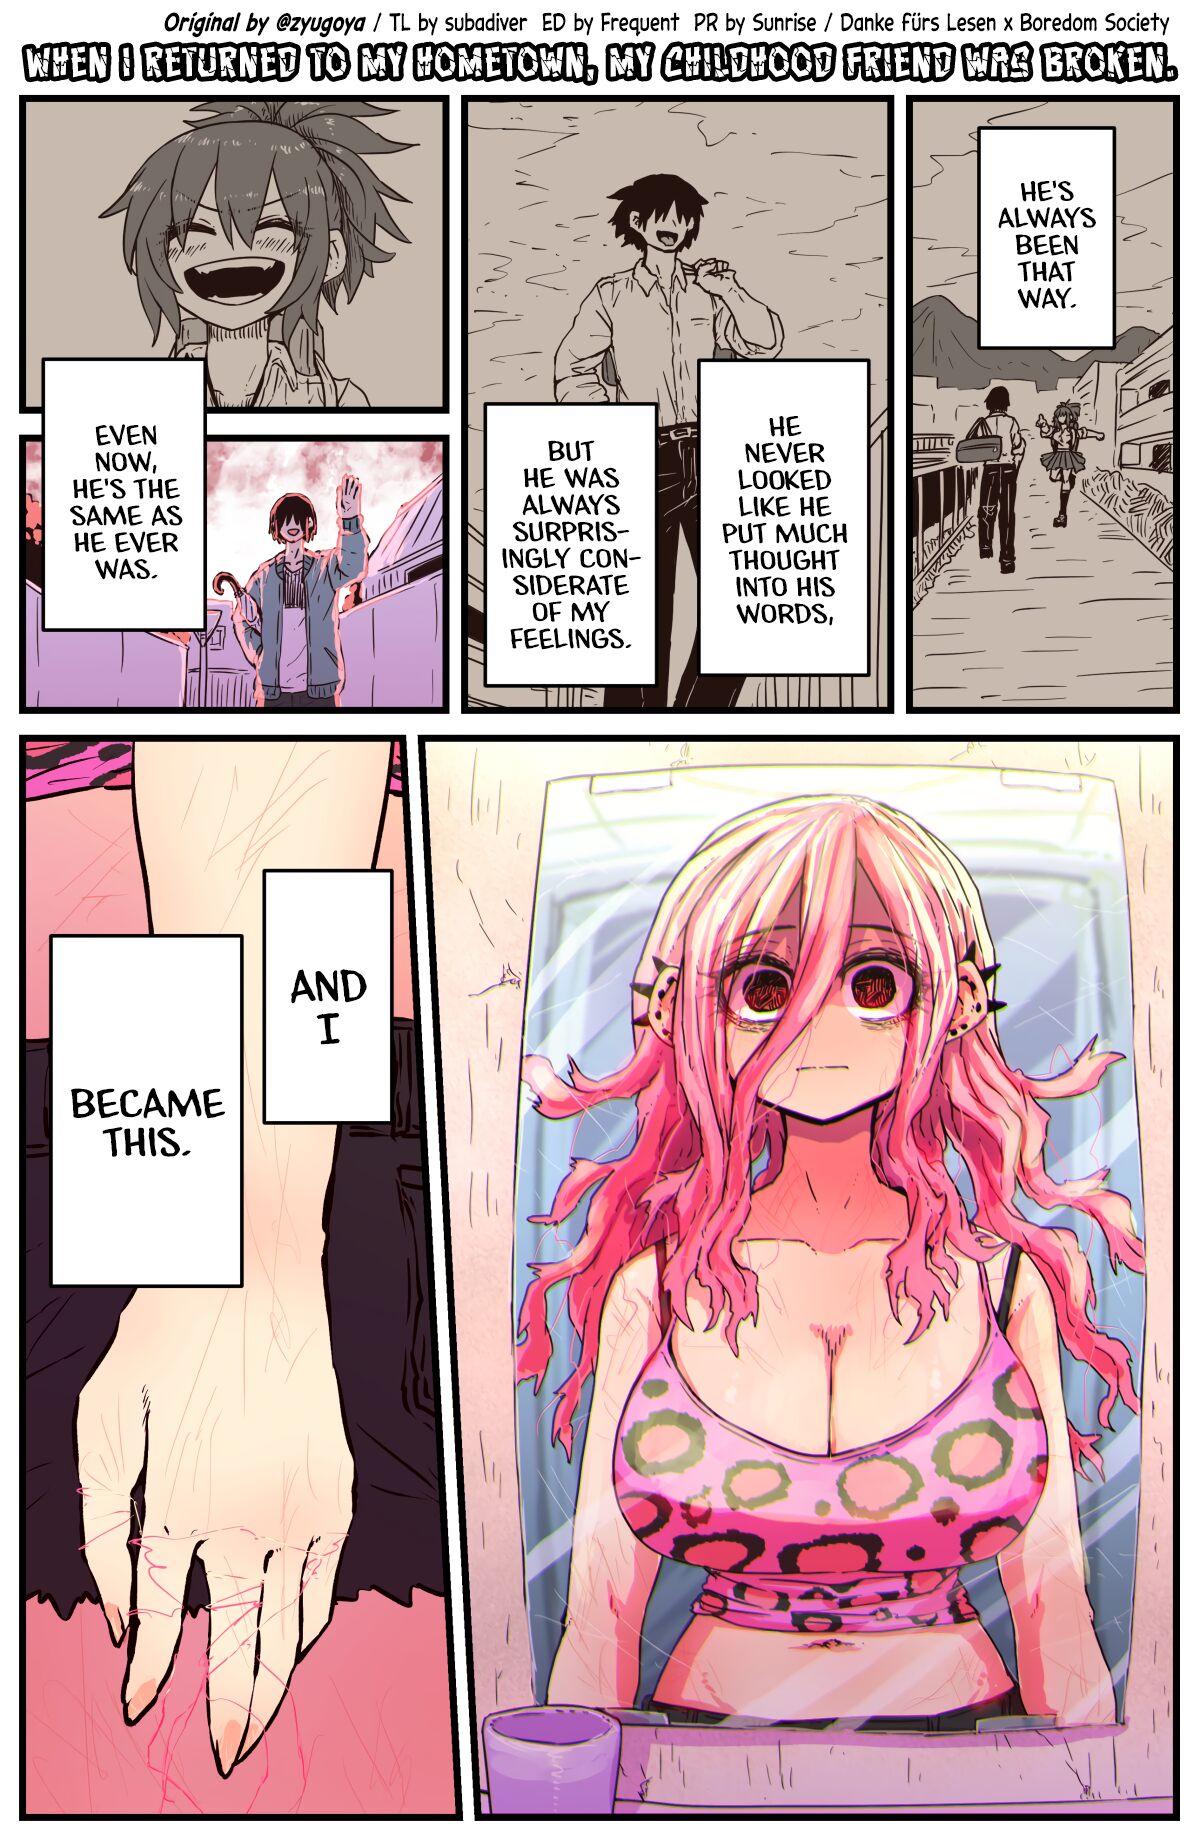 Taboo When I Returned to My Hometown, My Childhood Friend was Broken - Original Tites - Page 9